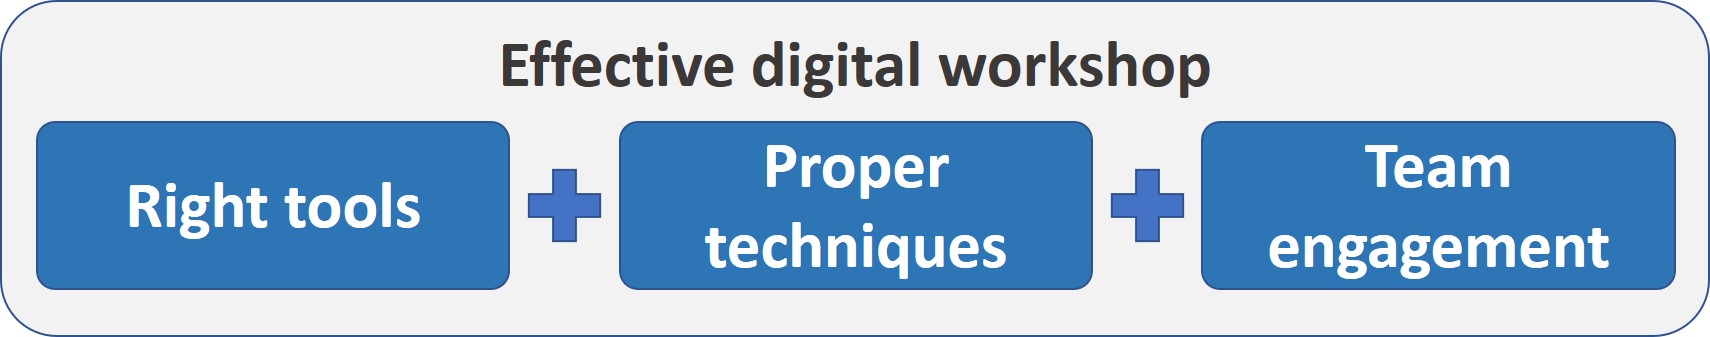 Effective digital workshop is using the right tools with proper techniques and team engagement